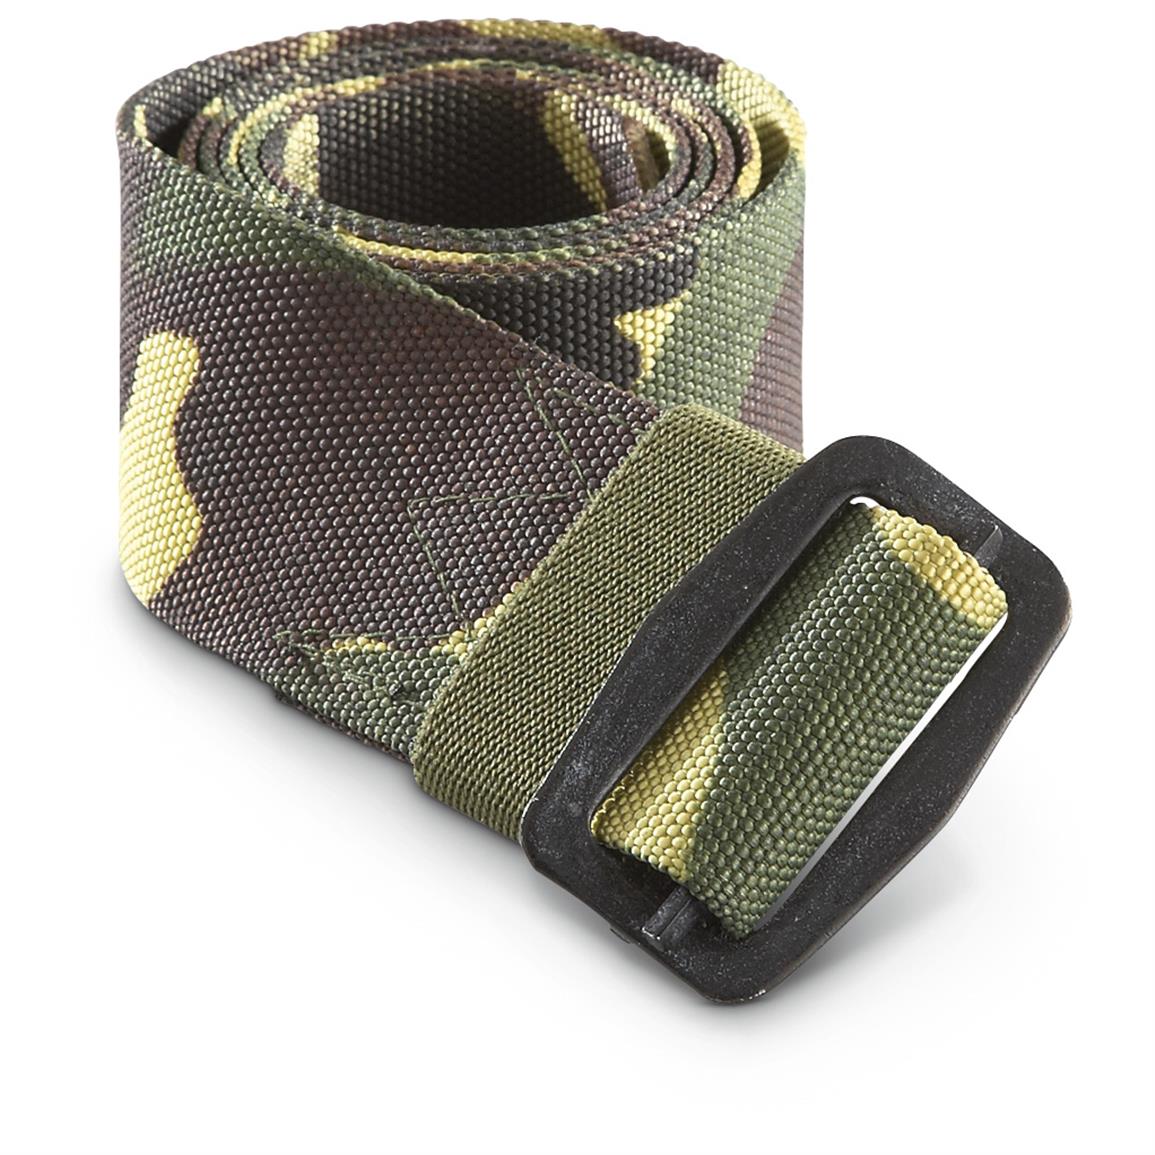 4 Military-style Rigger's Belts - 634439, Tactical Clothing at ...